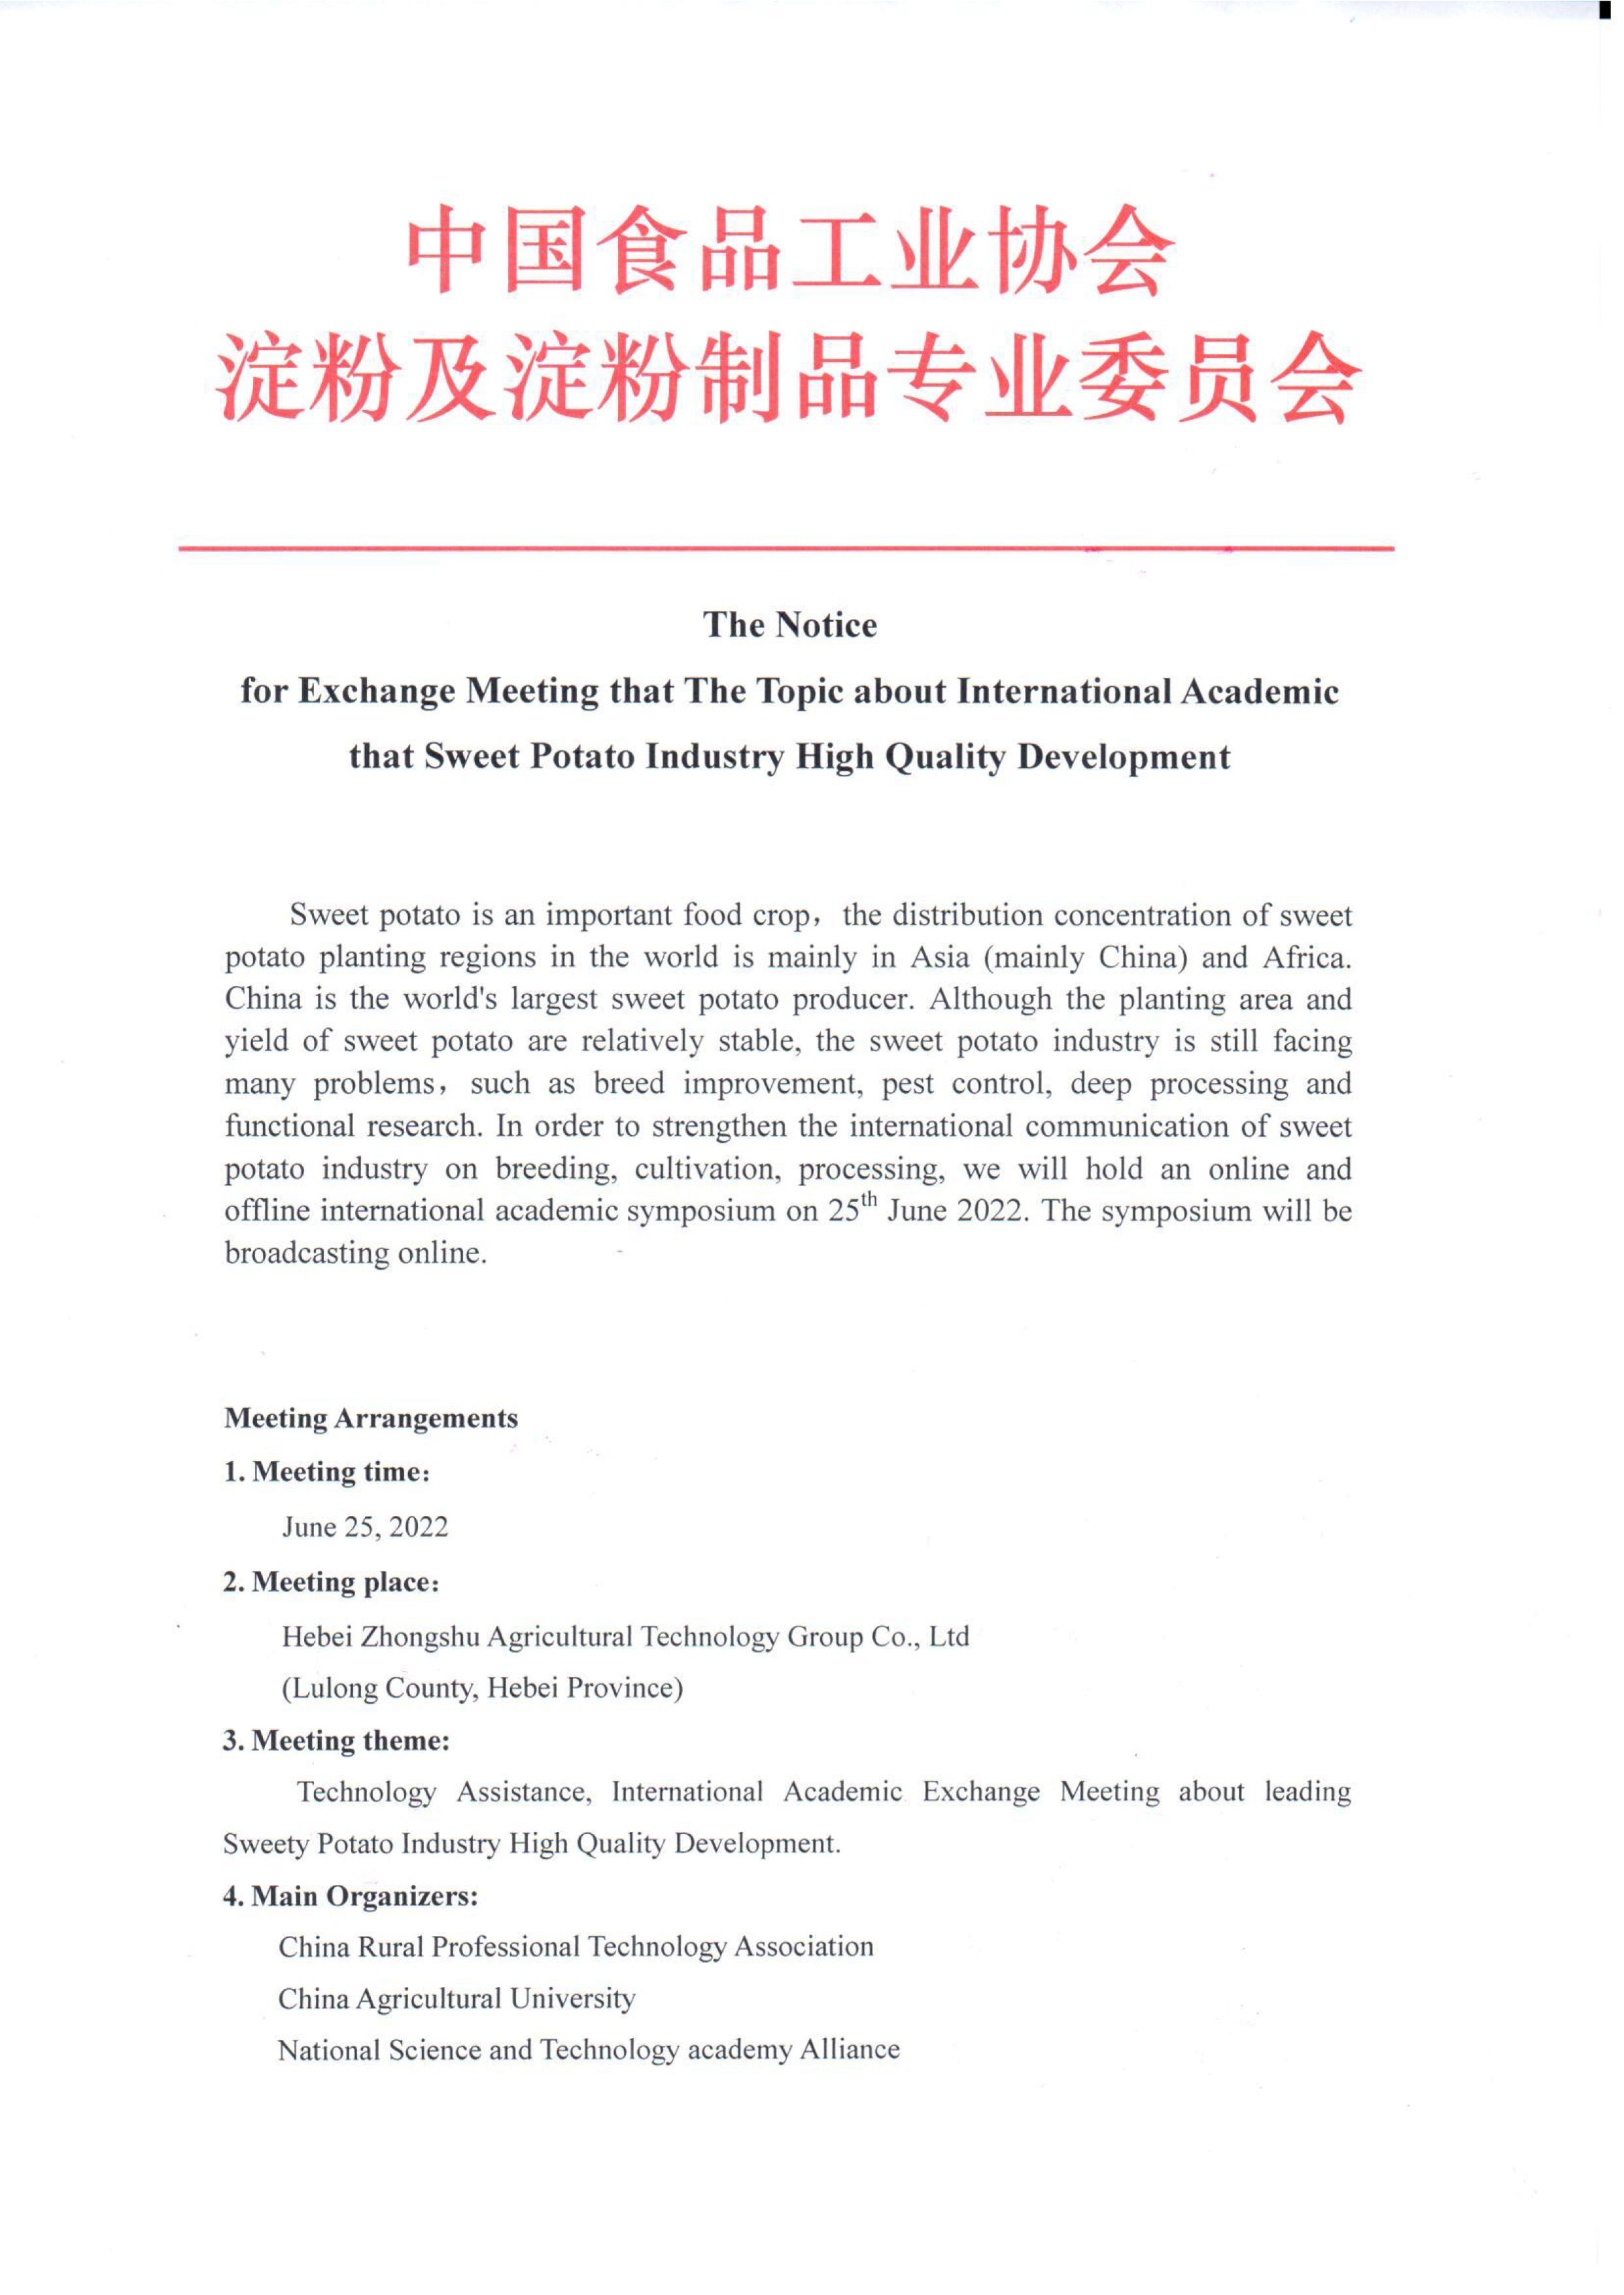 The Notice  for Exchange Meeting that The Topic about International Academic that Sweety Potato Industry High Quality Development